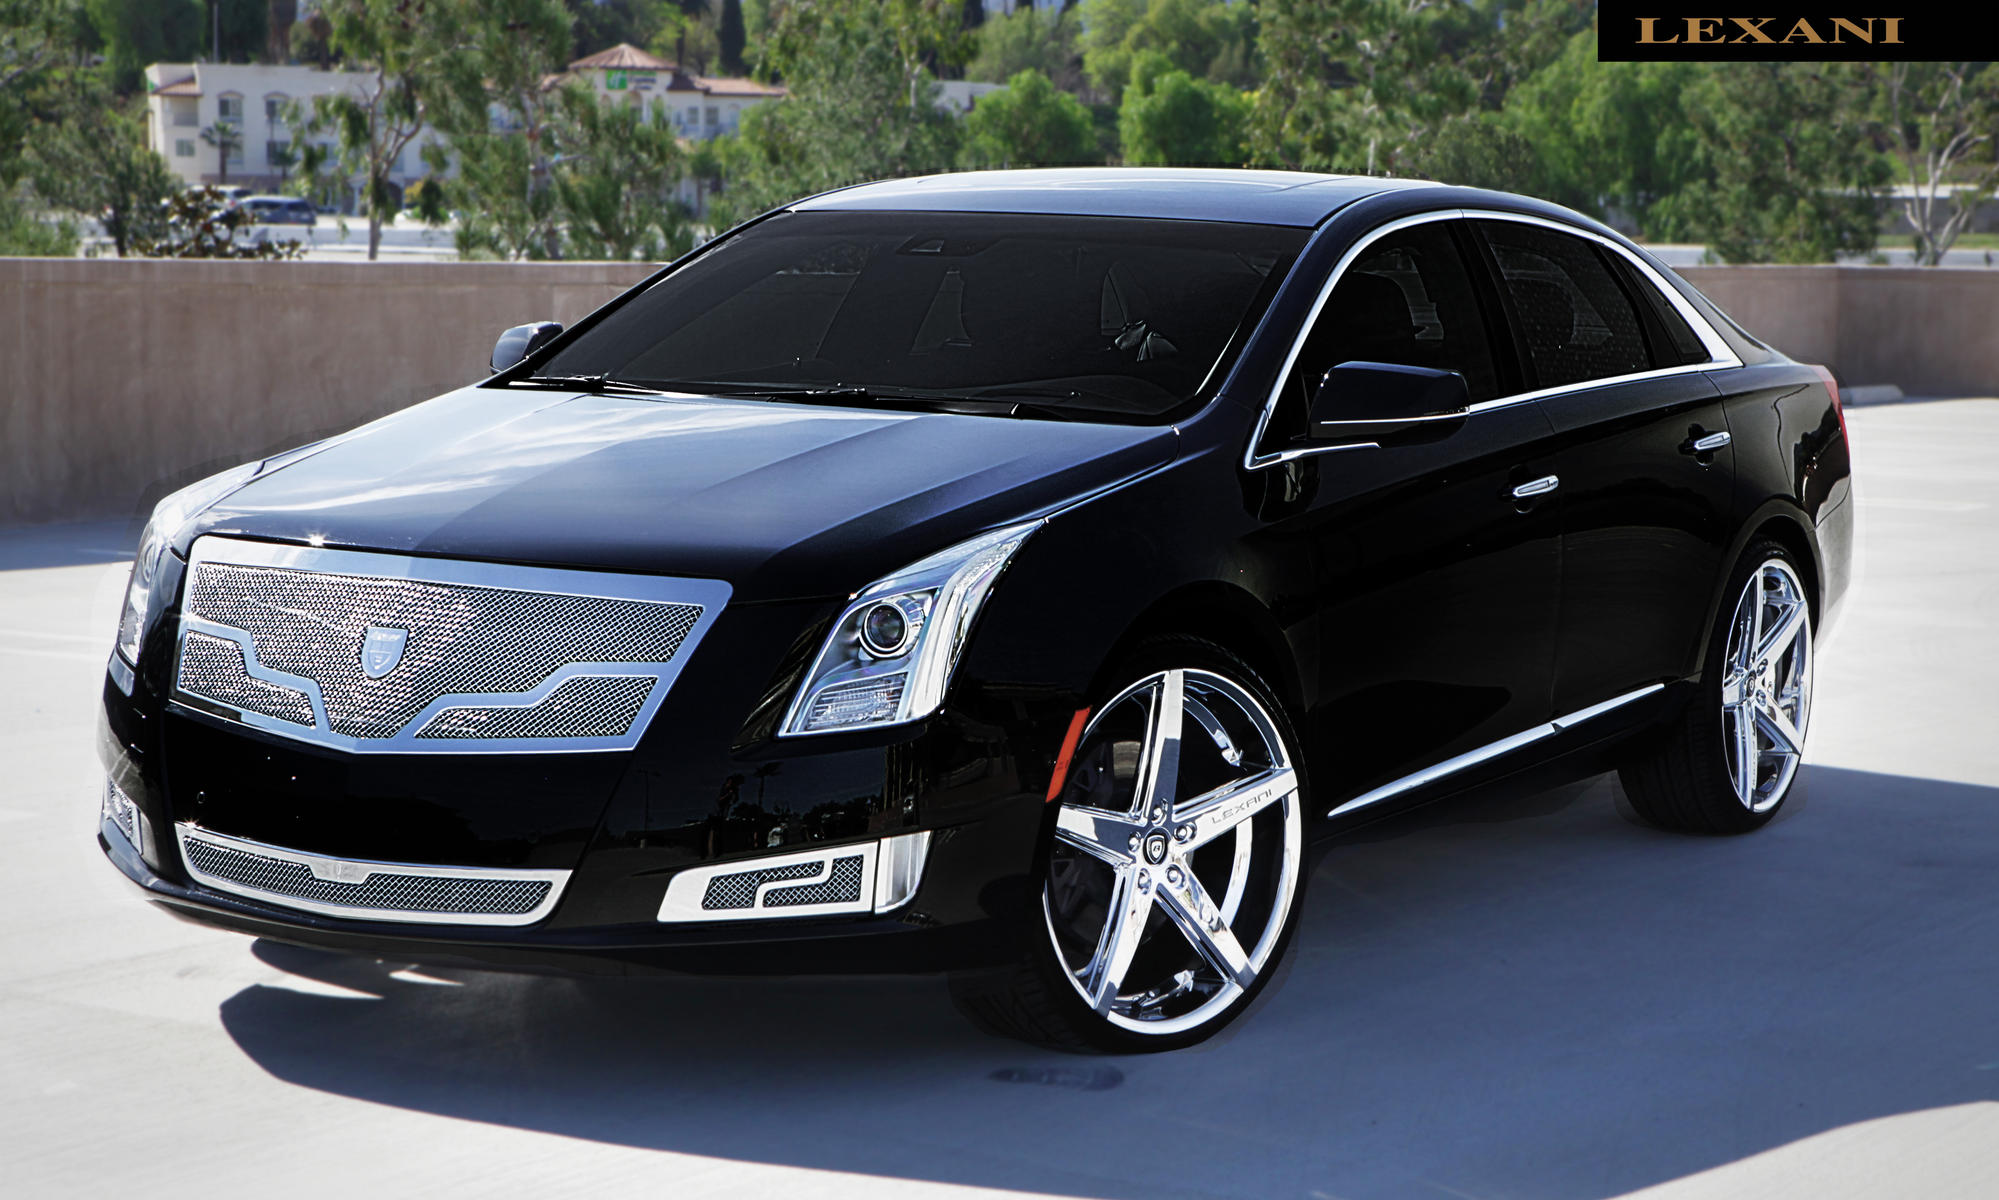 Amazing Cadillac XTS Pictures & Backgrounds